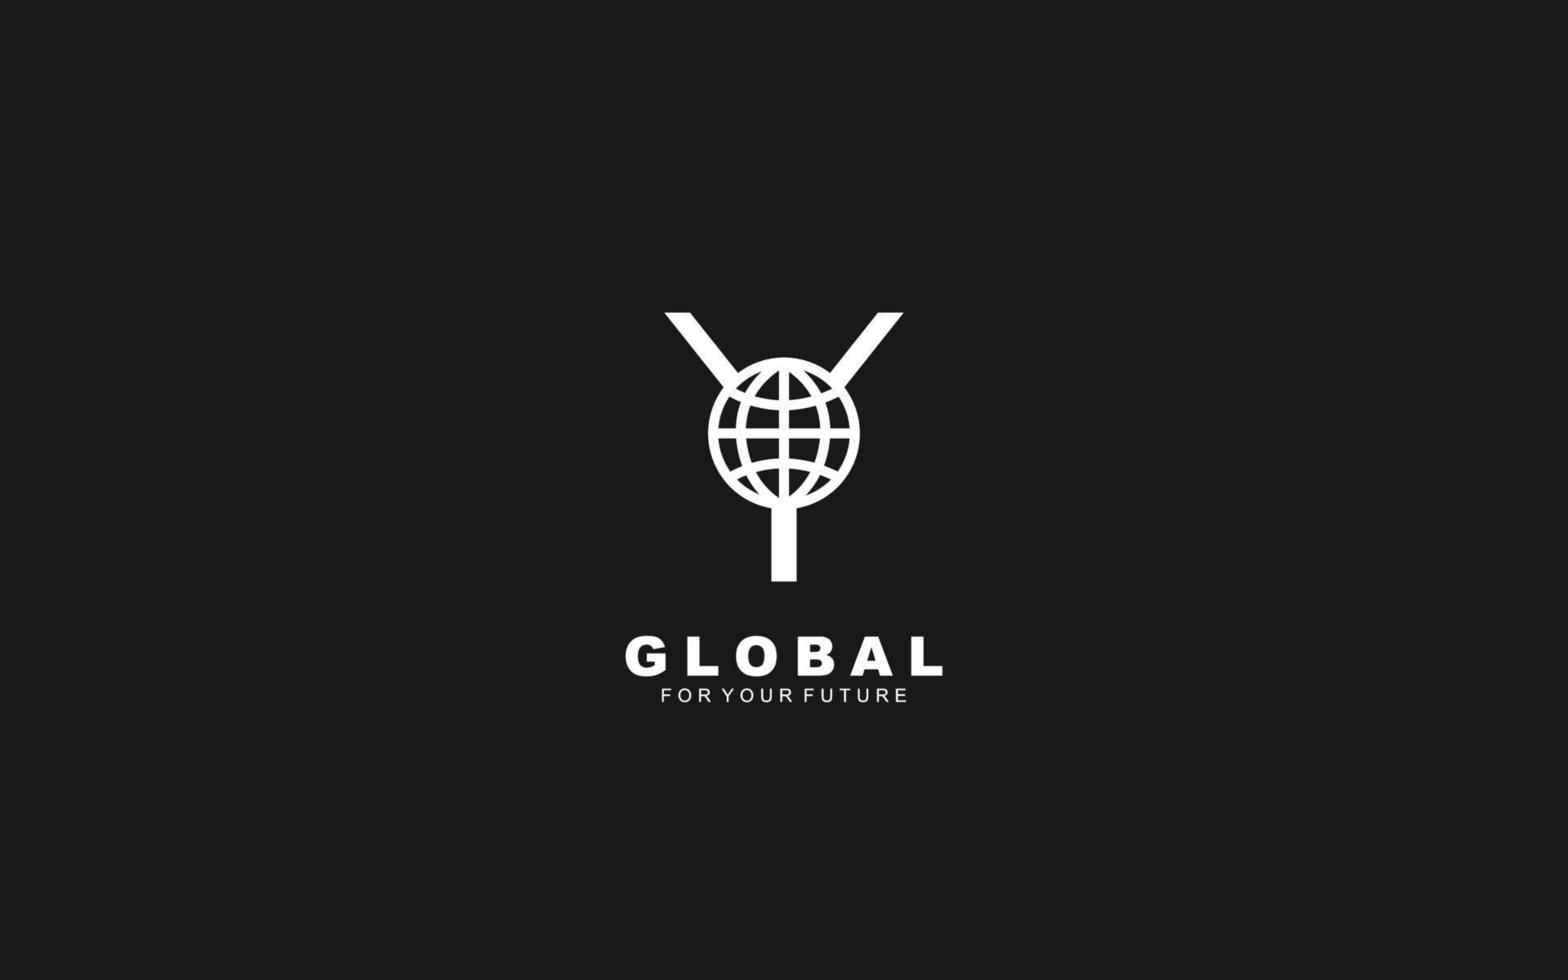 Y logo GLOBE for identity. NETWORK template vector illustration for your brand.